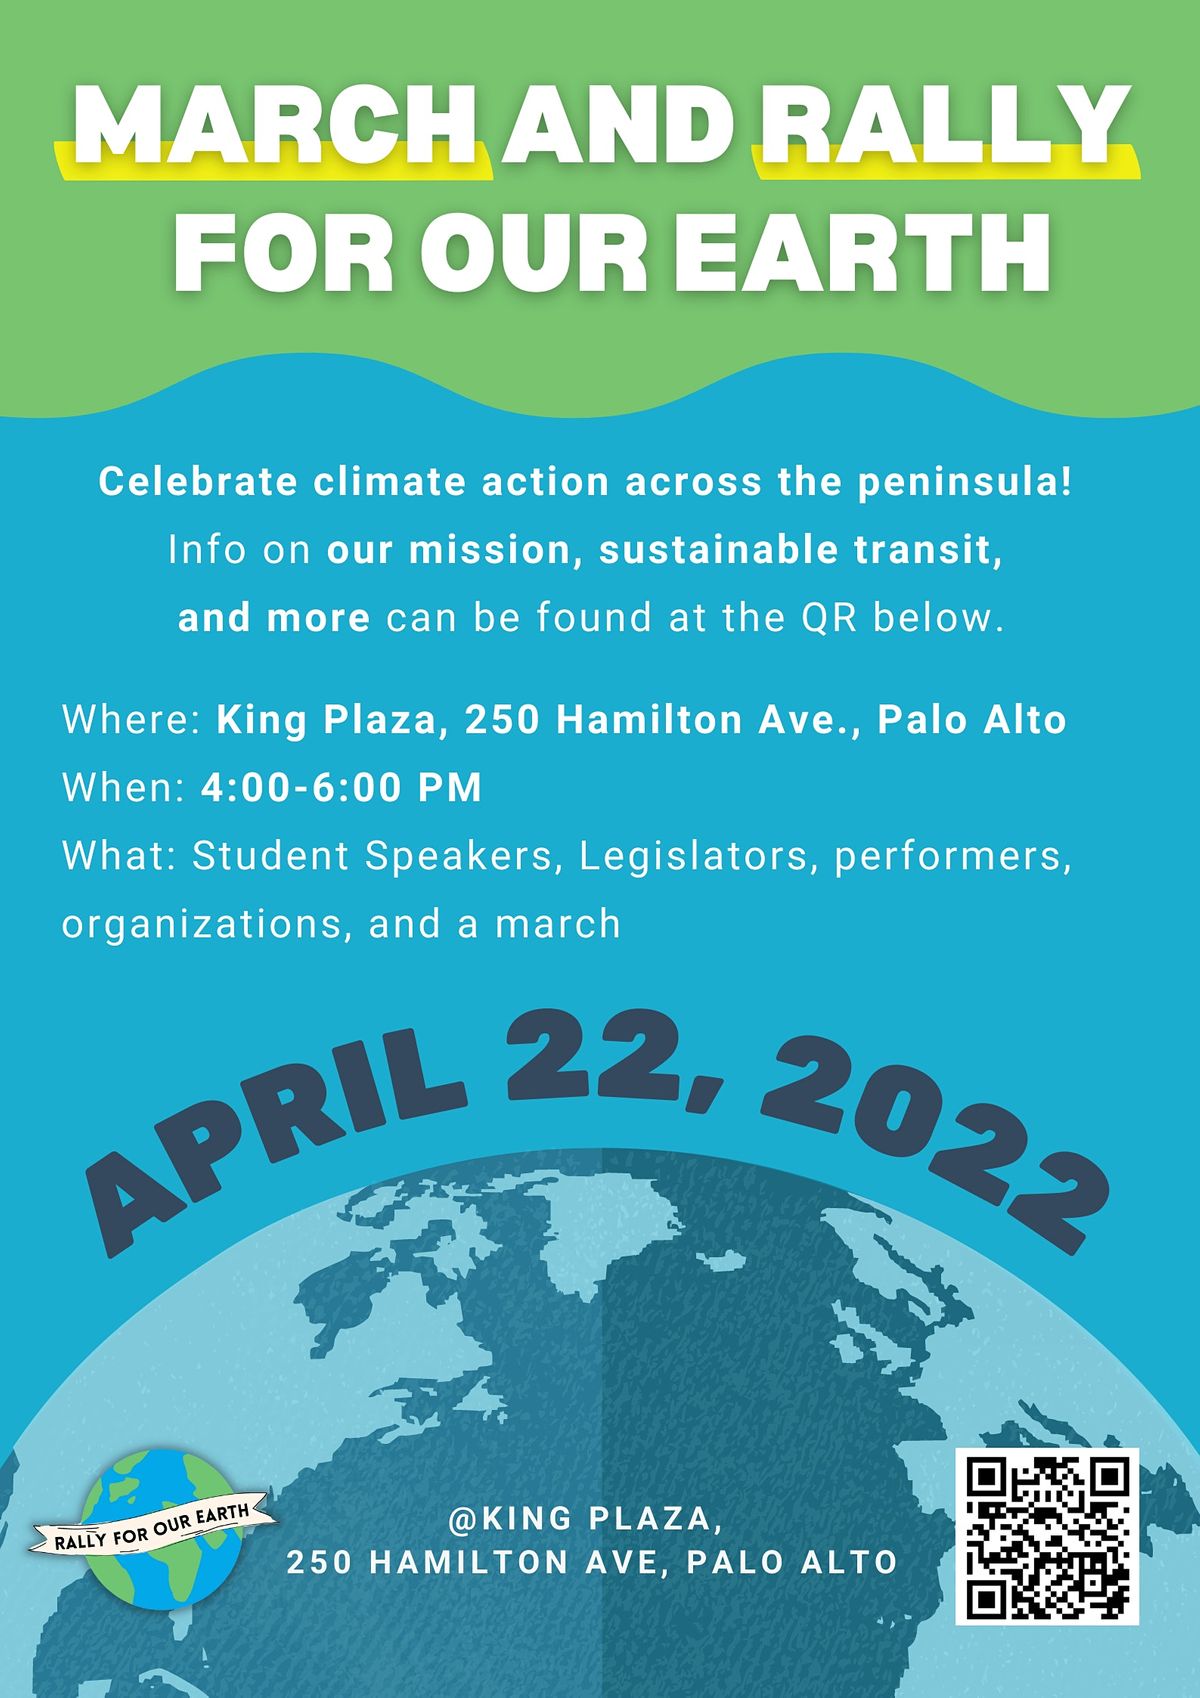 March and Rally for Our Earth